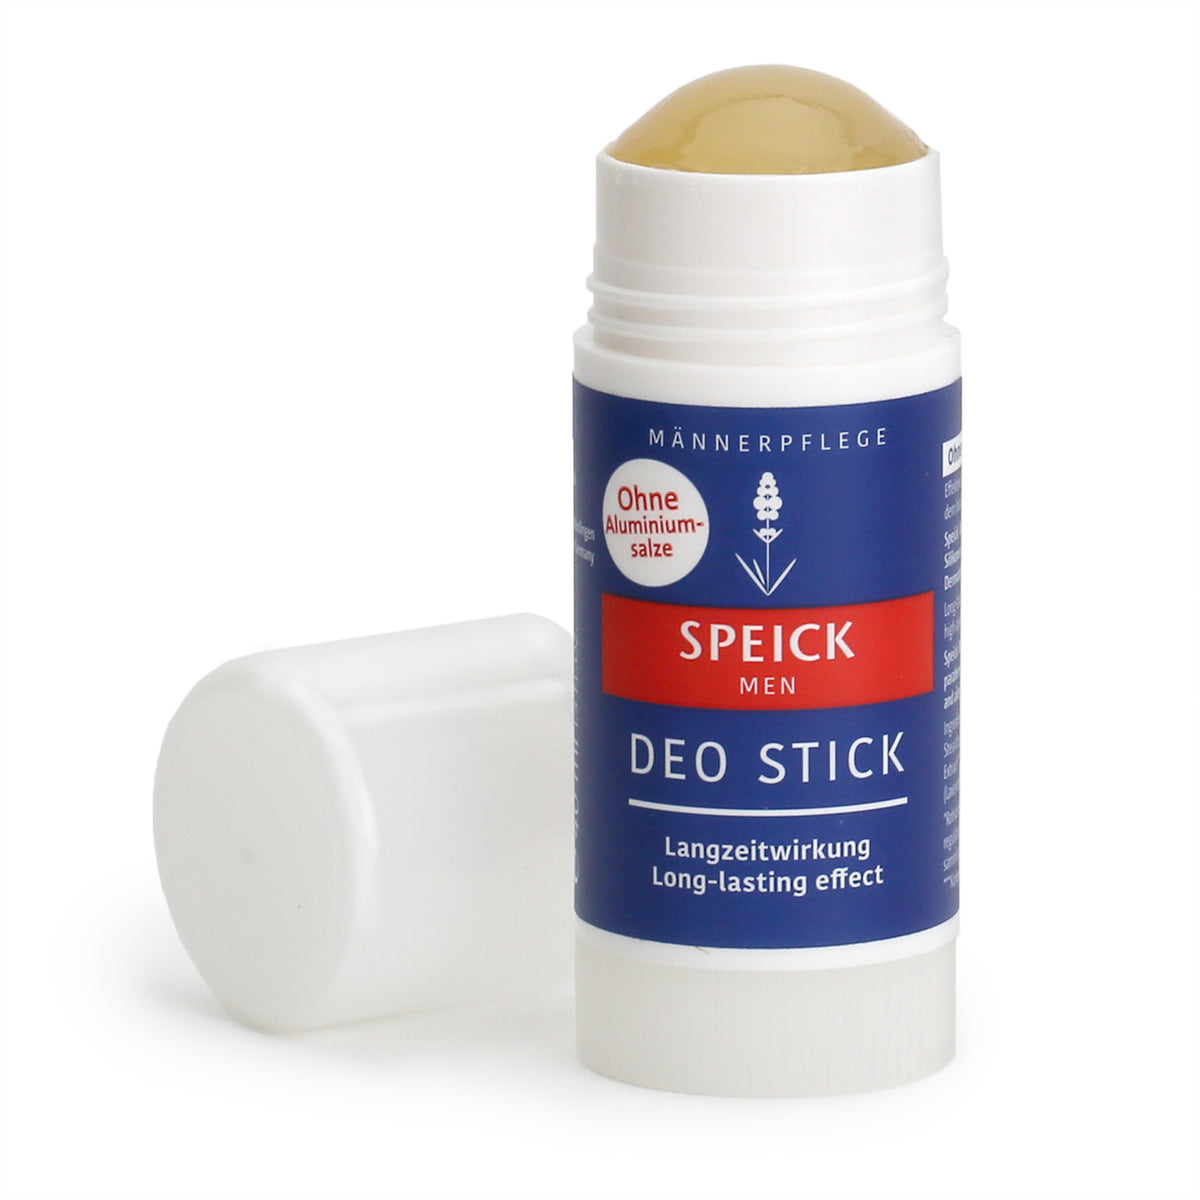 Speick Men Deo Stick is a white tube with screw-off lid and screw-up applicator